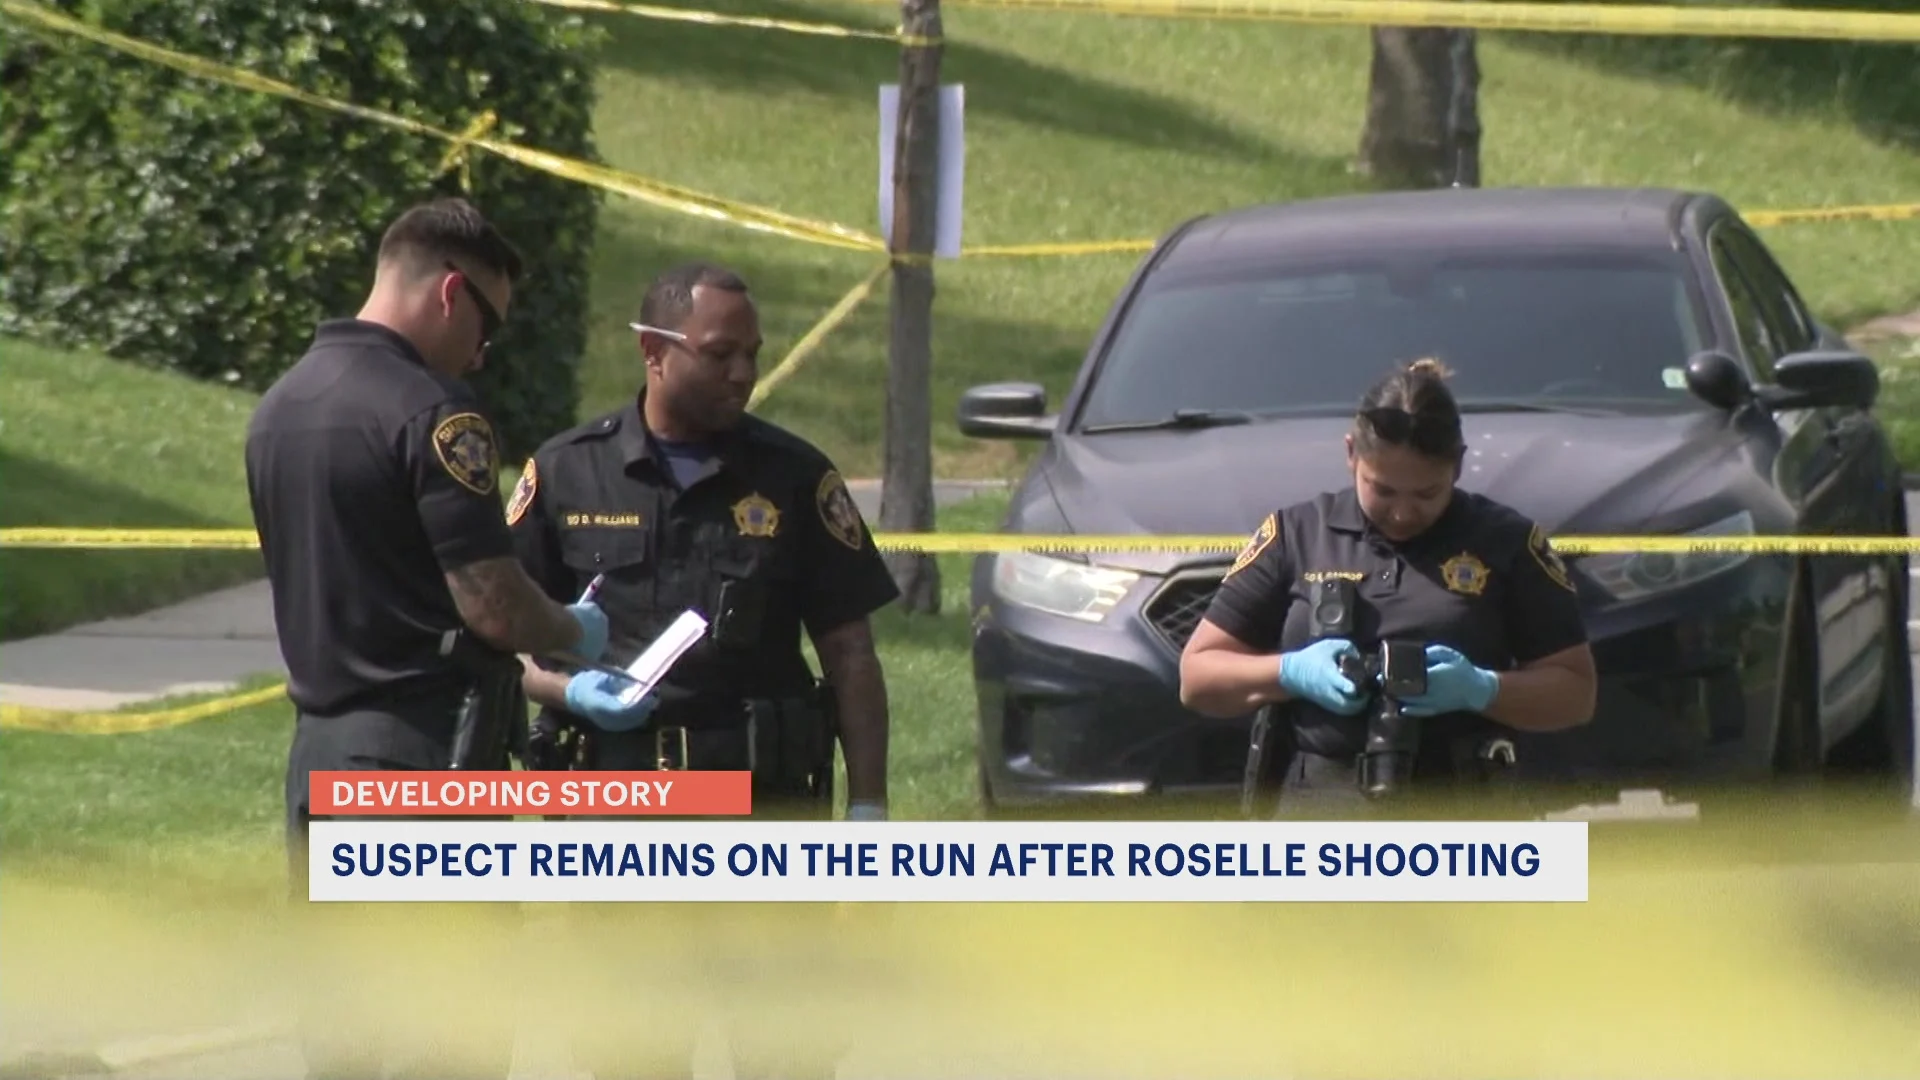 Police: 1 man charged, 1 on the run in gunfire exchange in Roselle that caused school lockdown